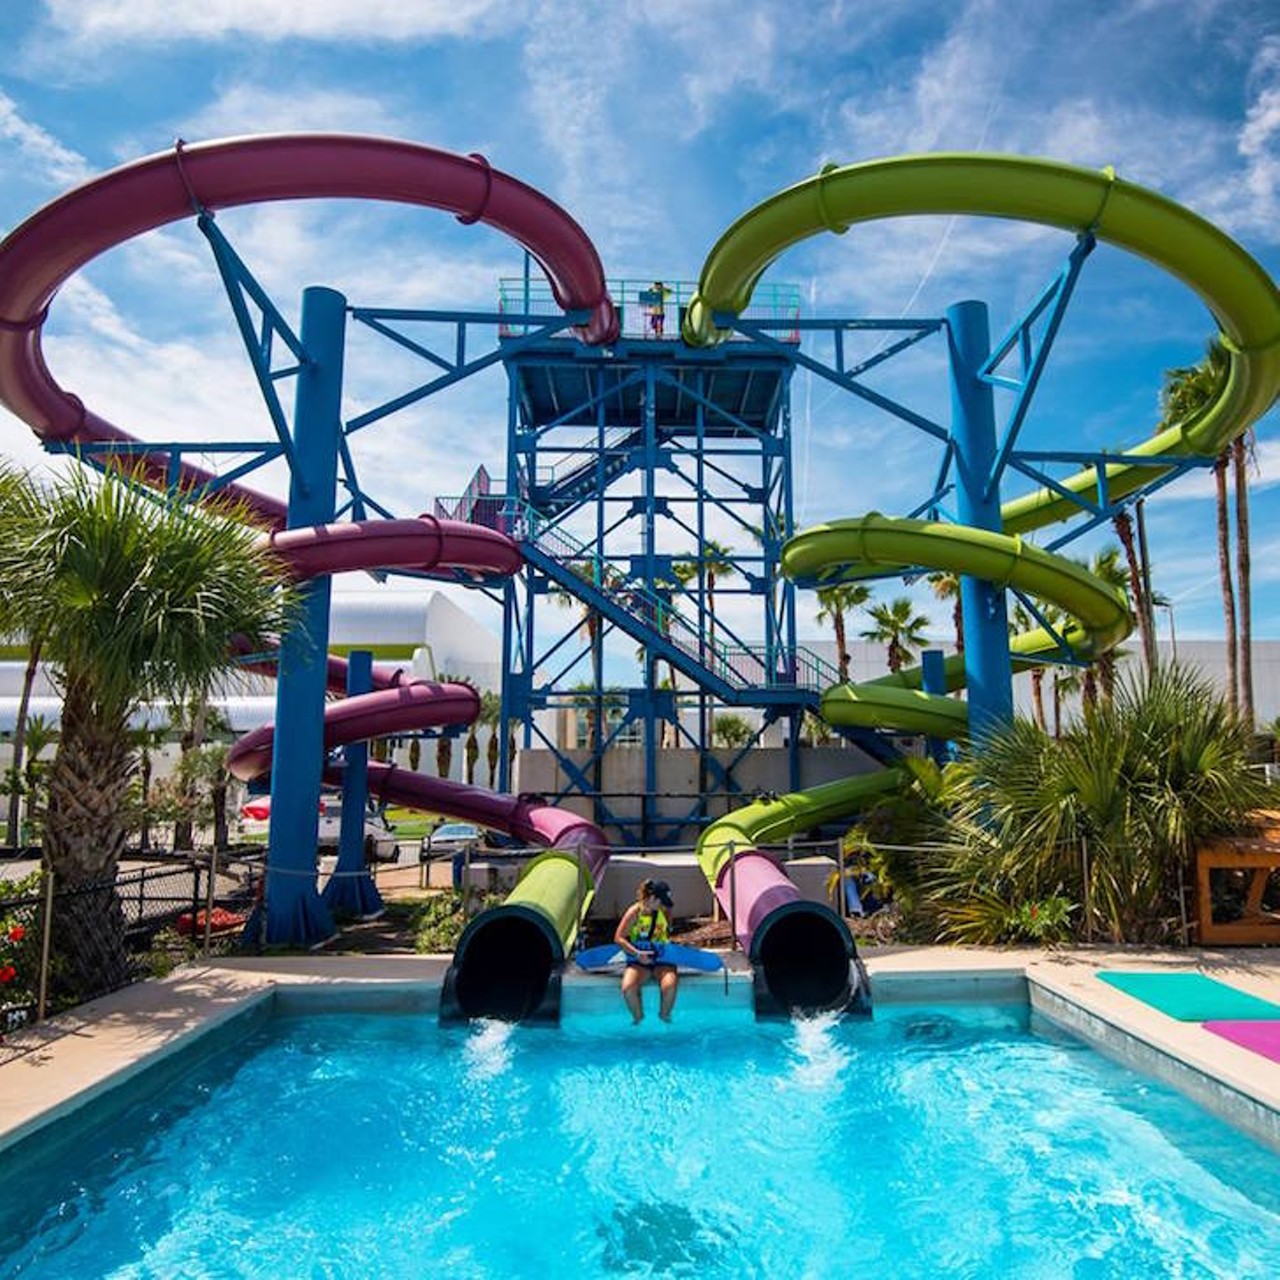 Slide down the new attractions at Daytona Lagoon
Estimated driving distance from Orlando: 1 hour 
Daytona Lagoon added two new waterslides after experiencing Hurricane Irma damage in 2017. The attractions to the lagoon include a thrilling half-pipe slide and a multi-colored four lane race mat slide. 
Photo via Daytona Lagoon /Facebook